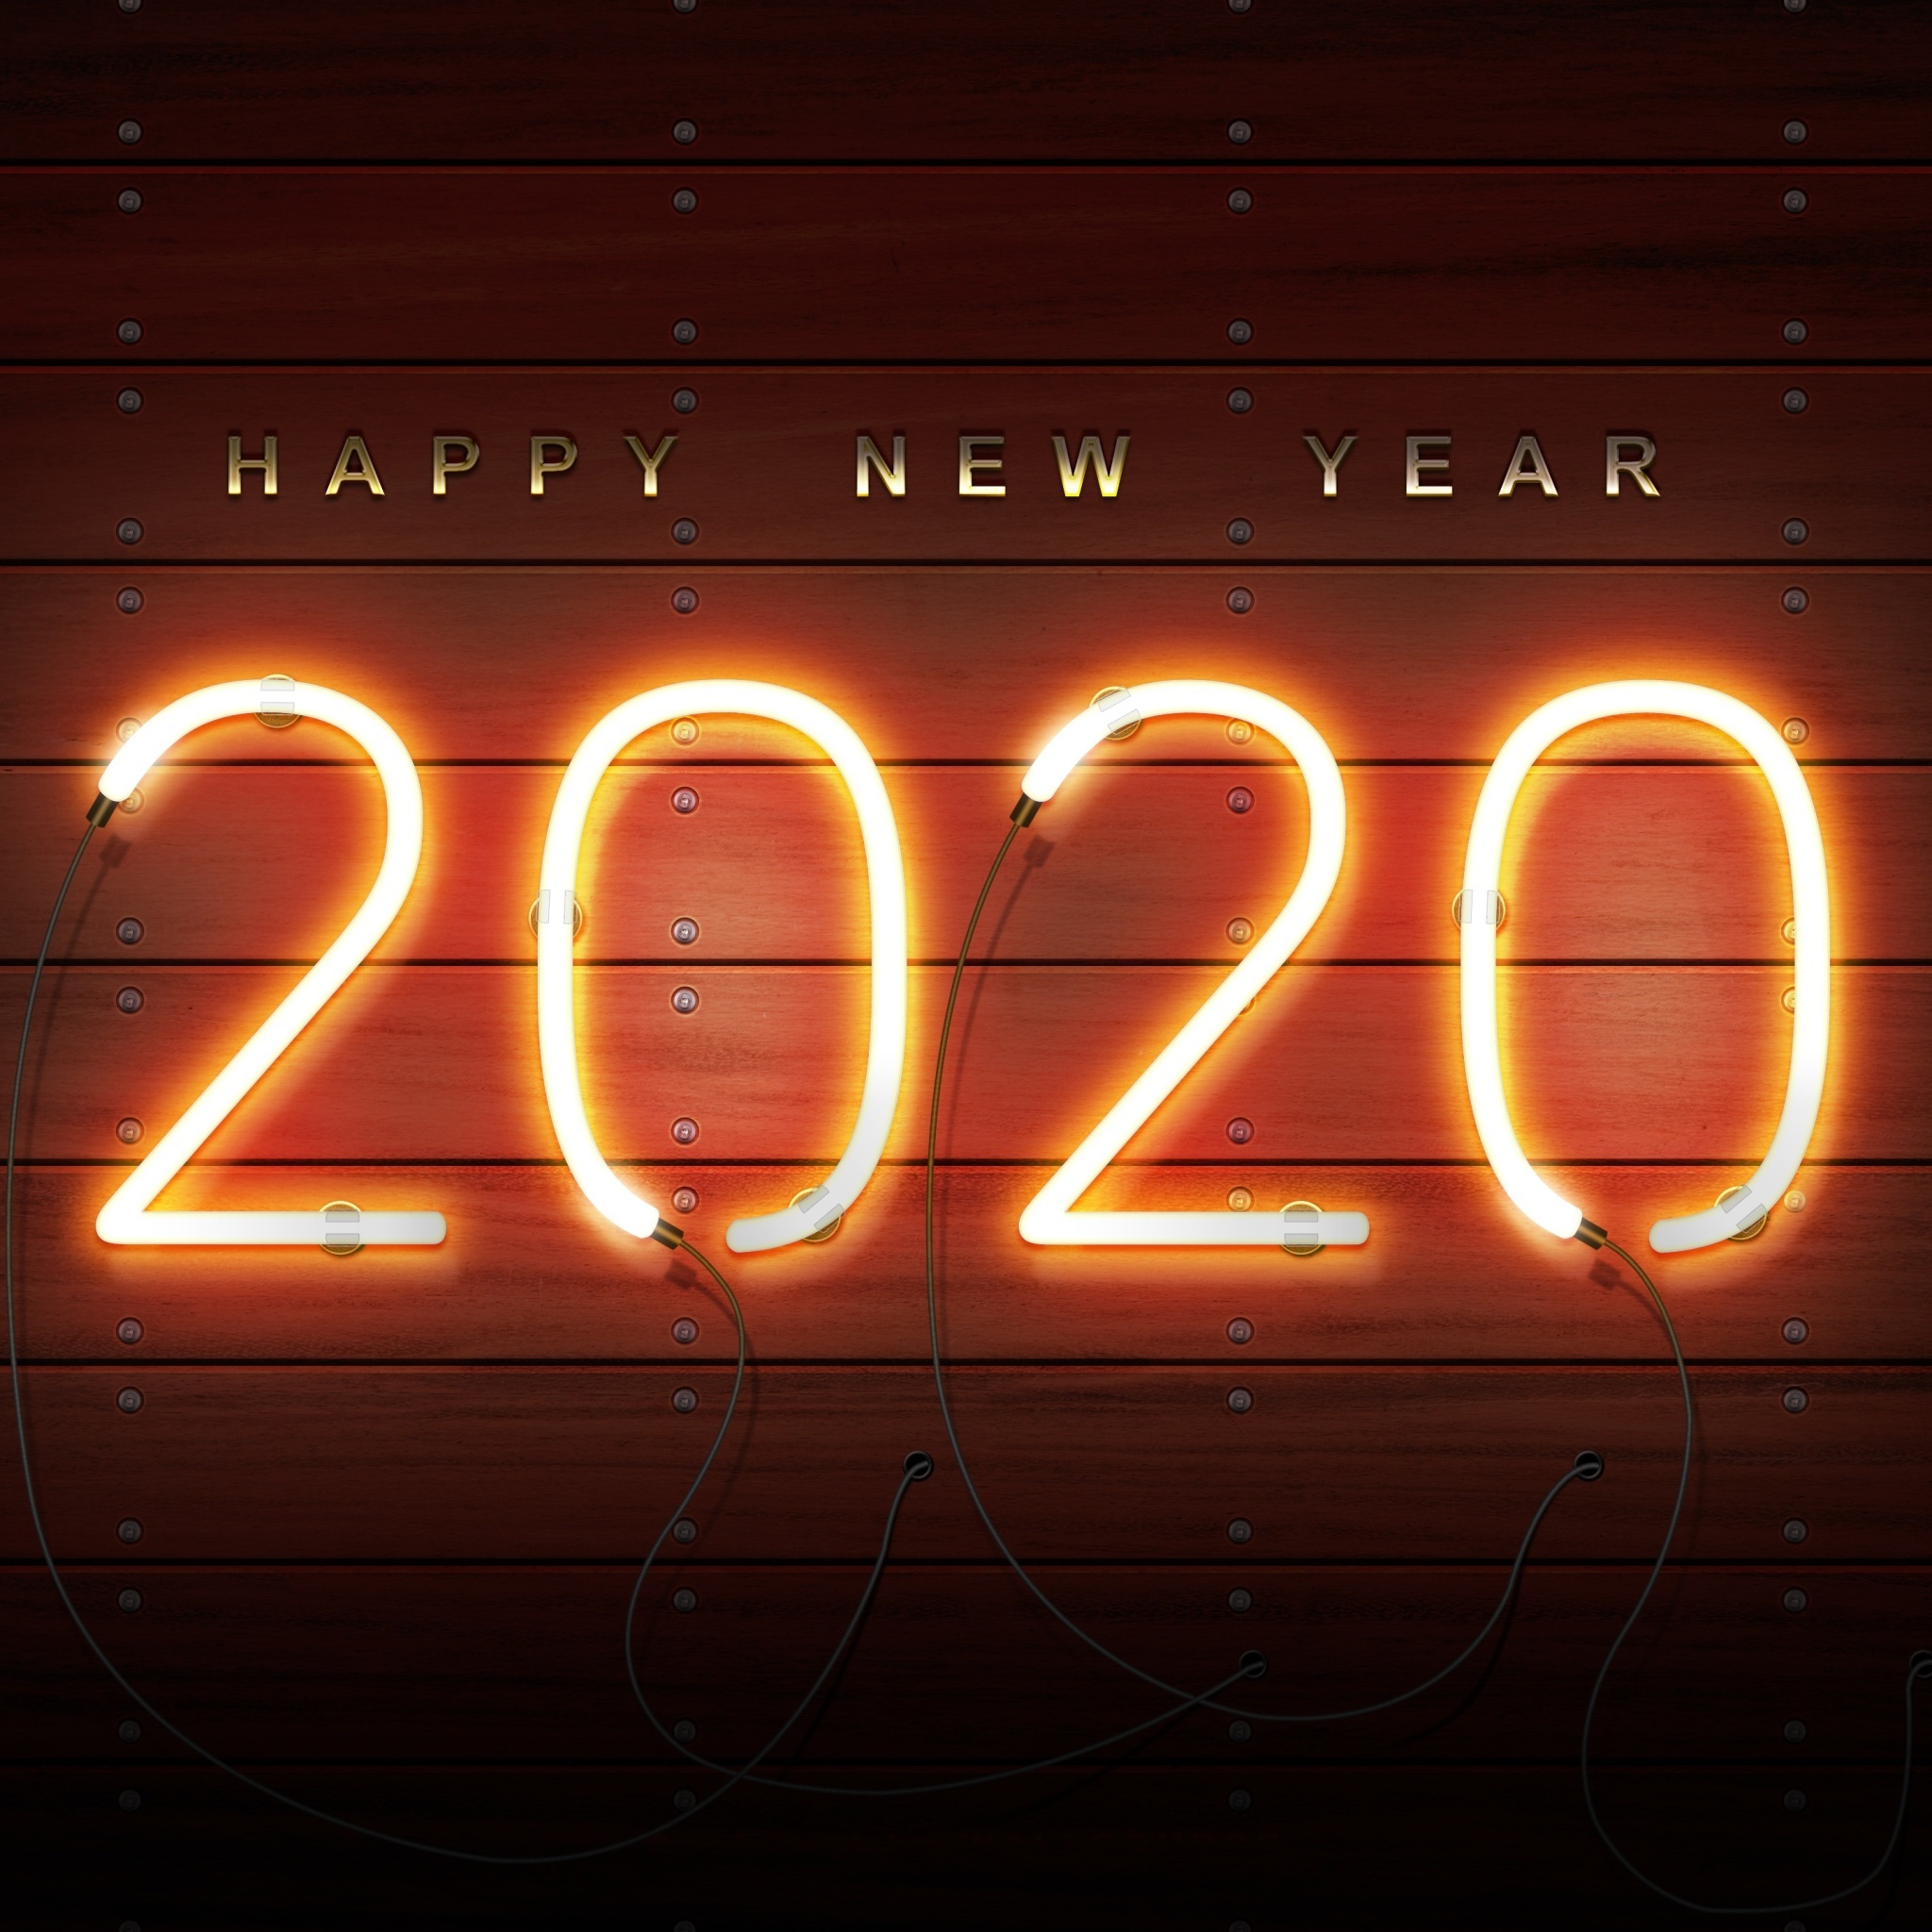 Happy New Year 2020 Wishes wallpaper 2048x2048